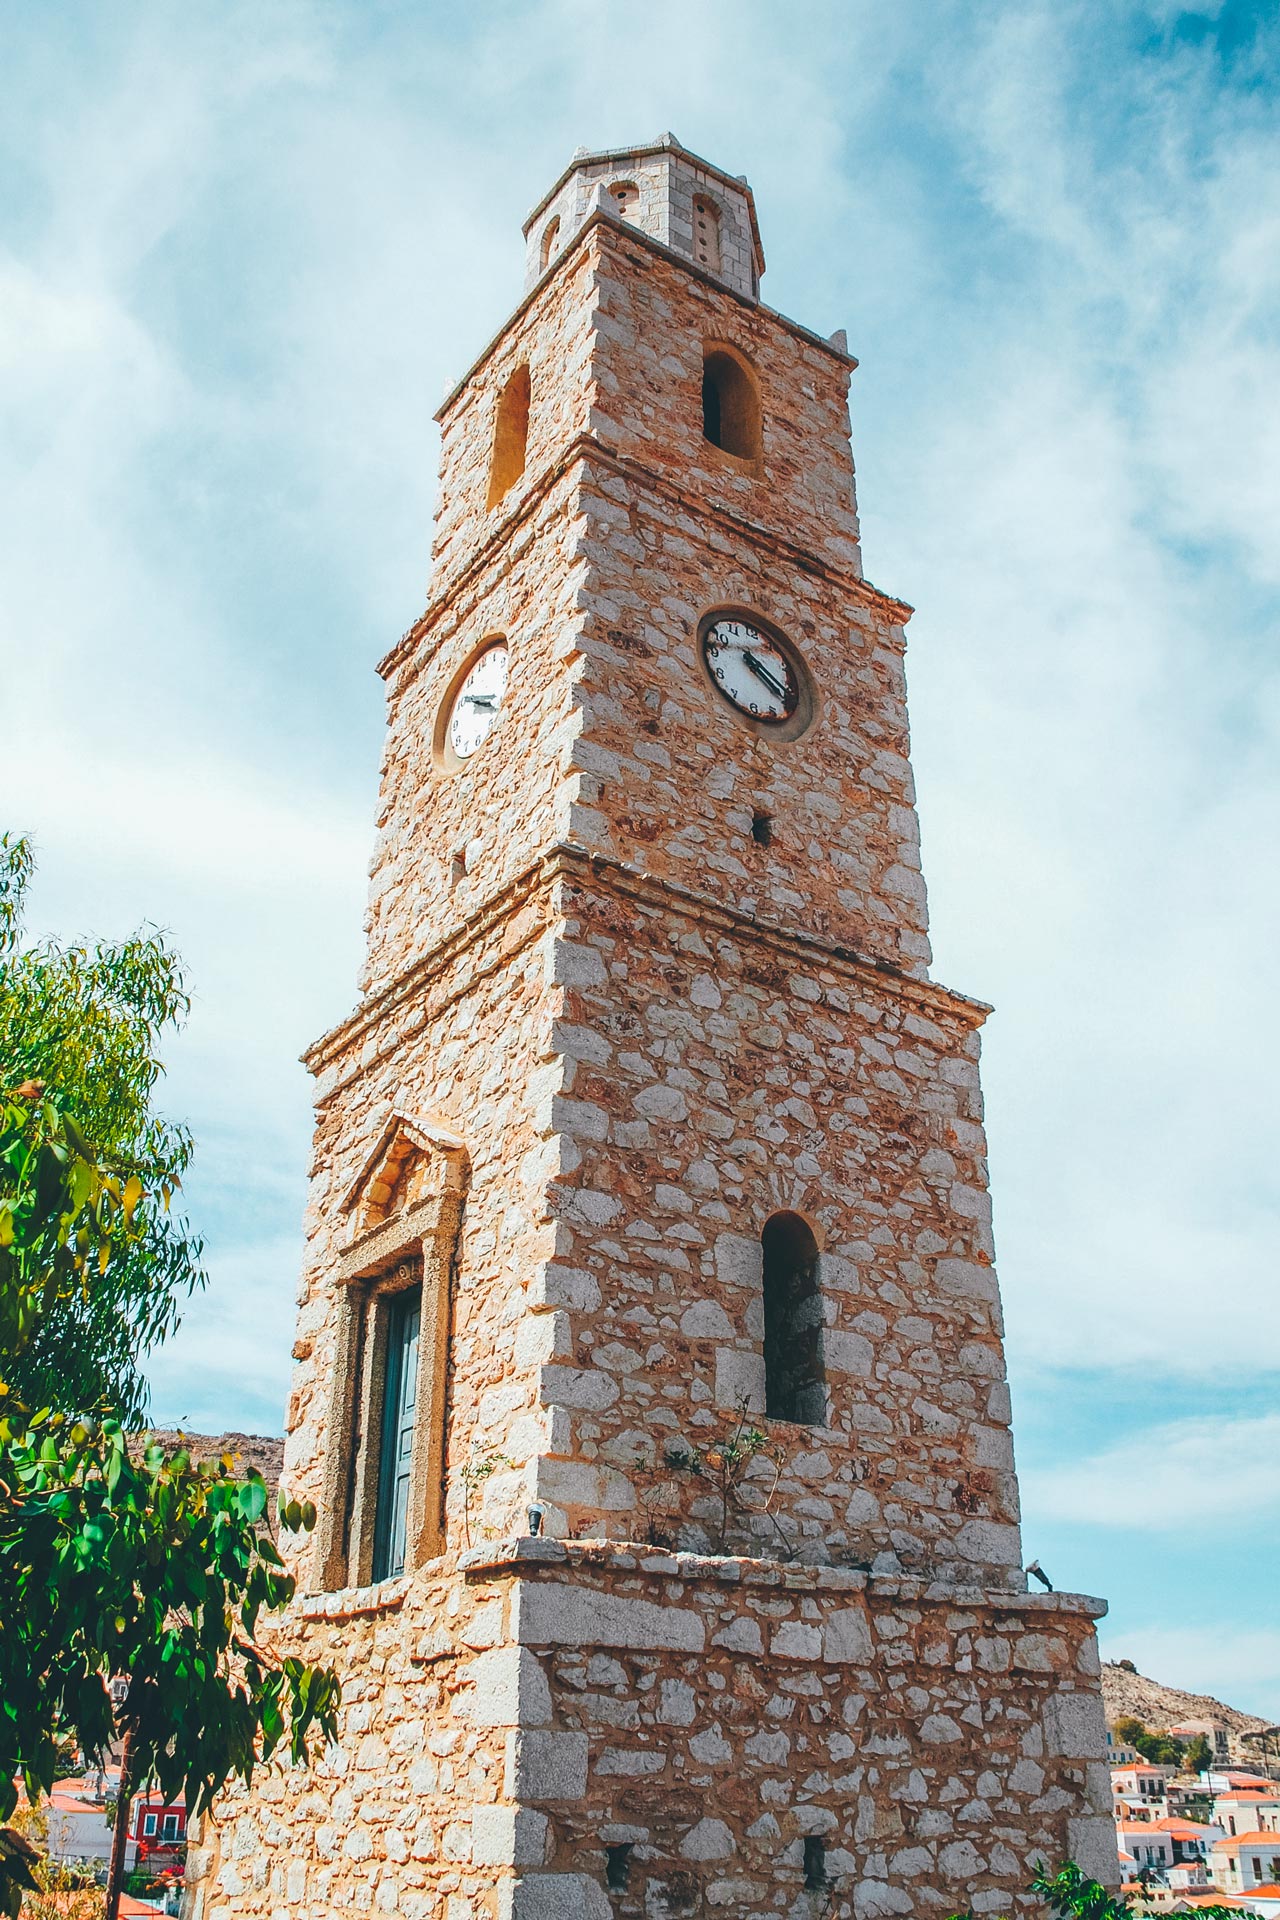 The 19th century church of St Nicholas, with its bell tower supported by an arch partially built using ancient columns